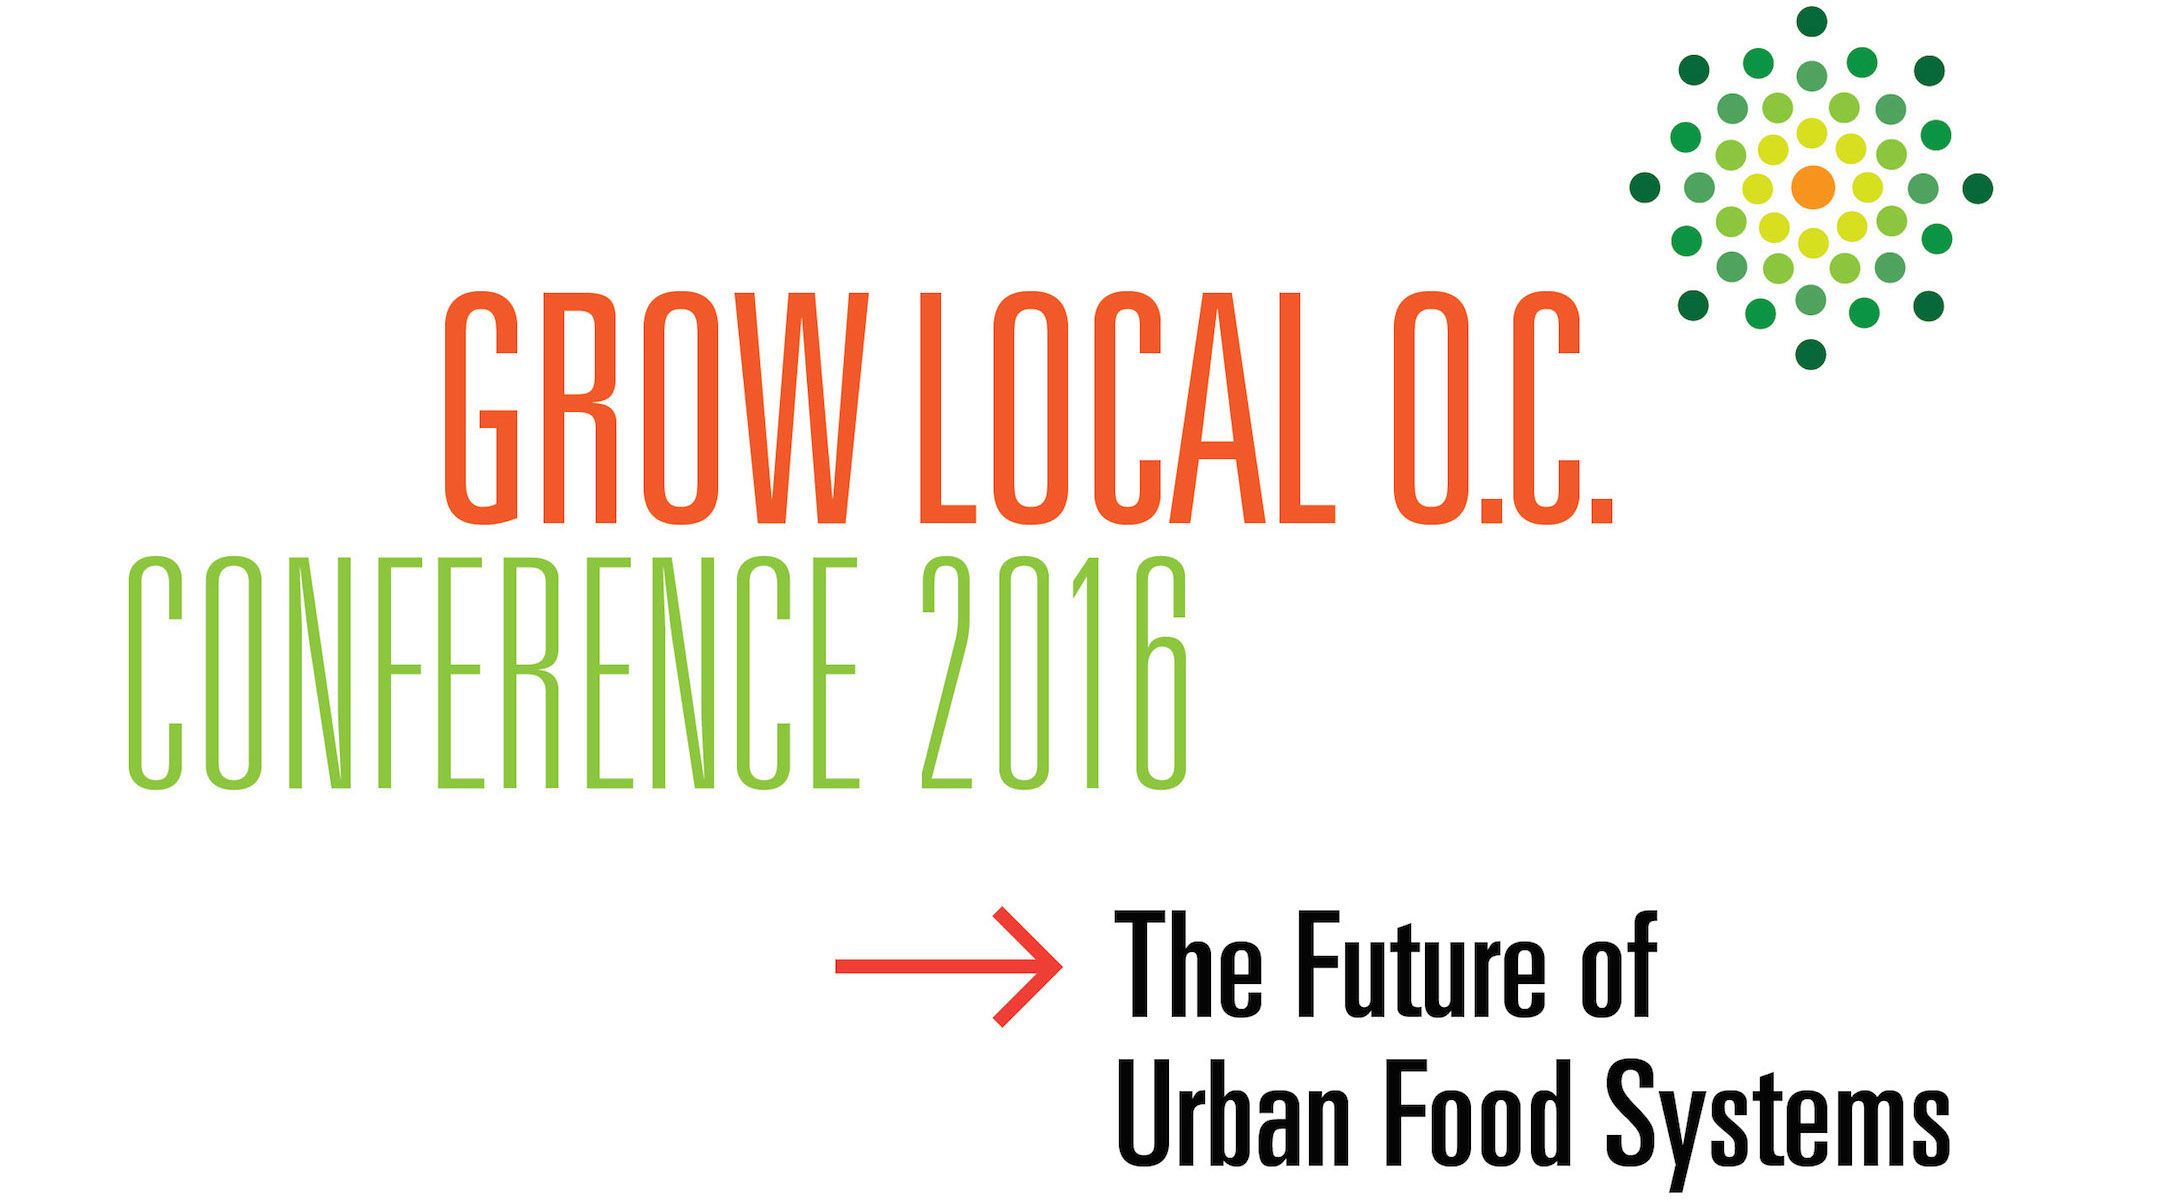 Future of Urban Food Systems Will be Focus of Twoday "Grow Local OC